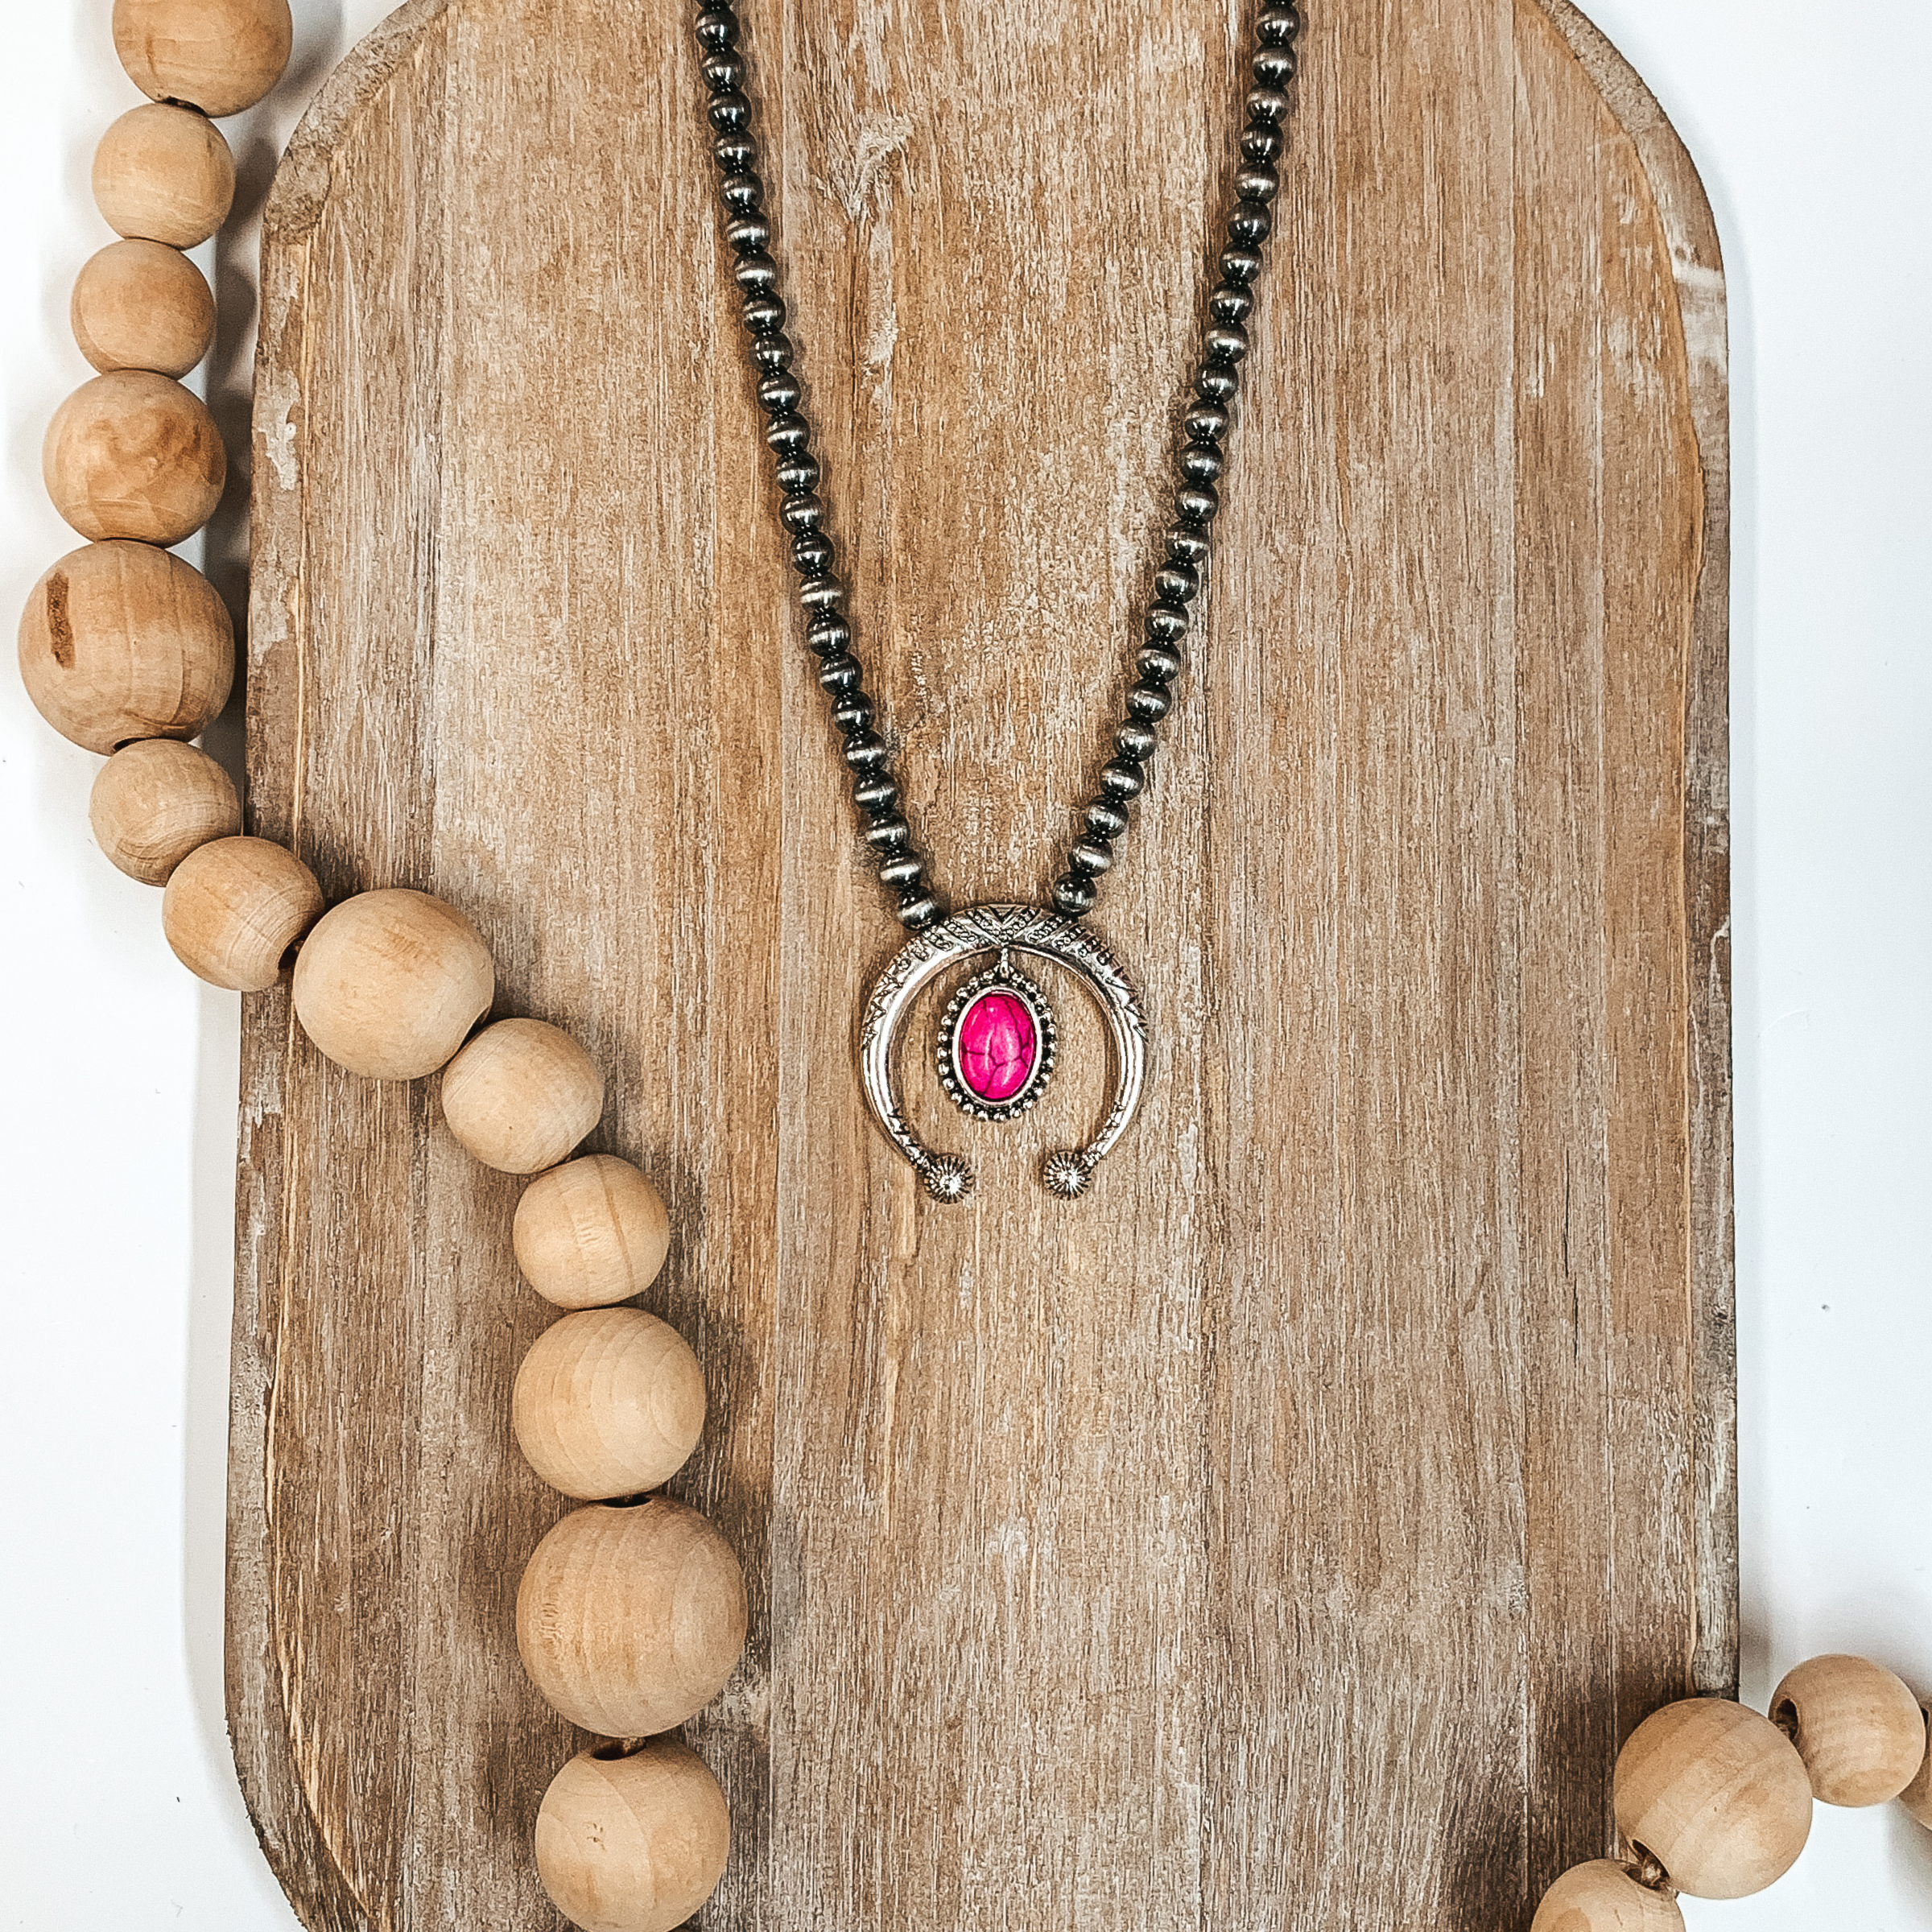 Squash Blossom with Oval Pendant and Navajo Inspired Pearl Necklace in Fuchsia - Giddy Up Glamour Boutique